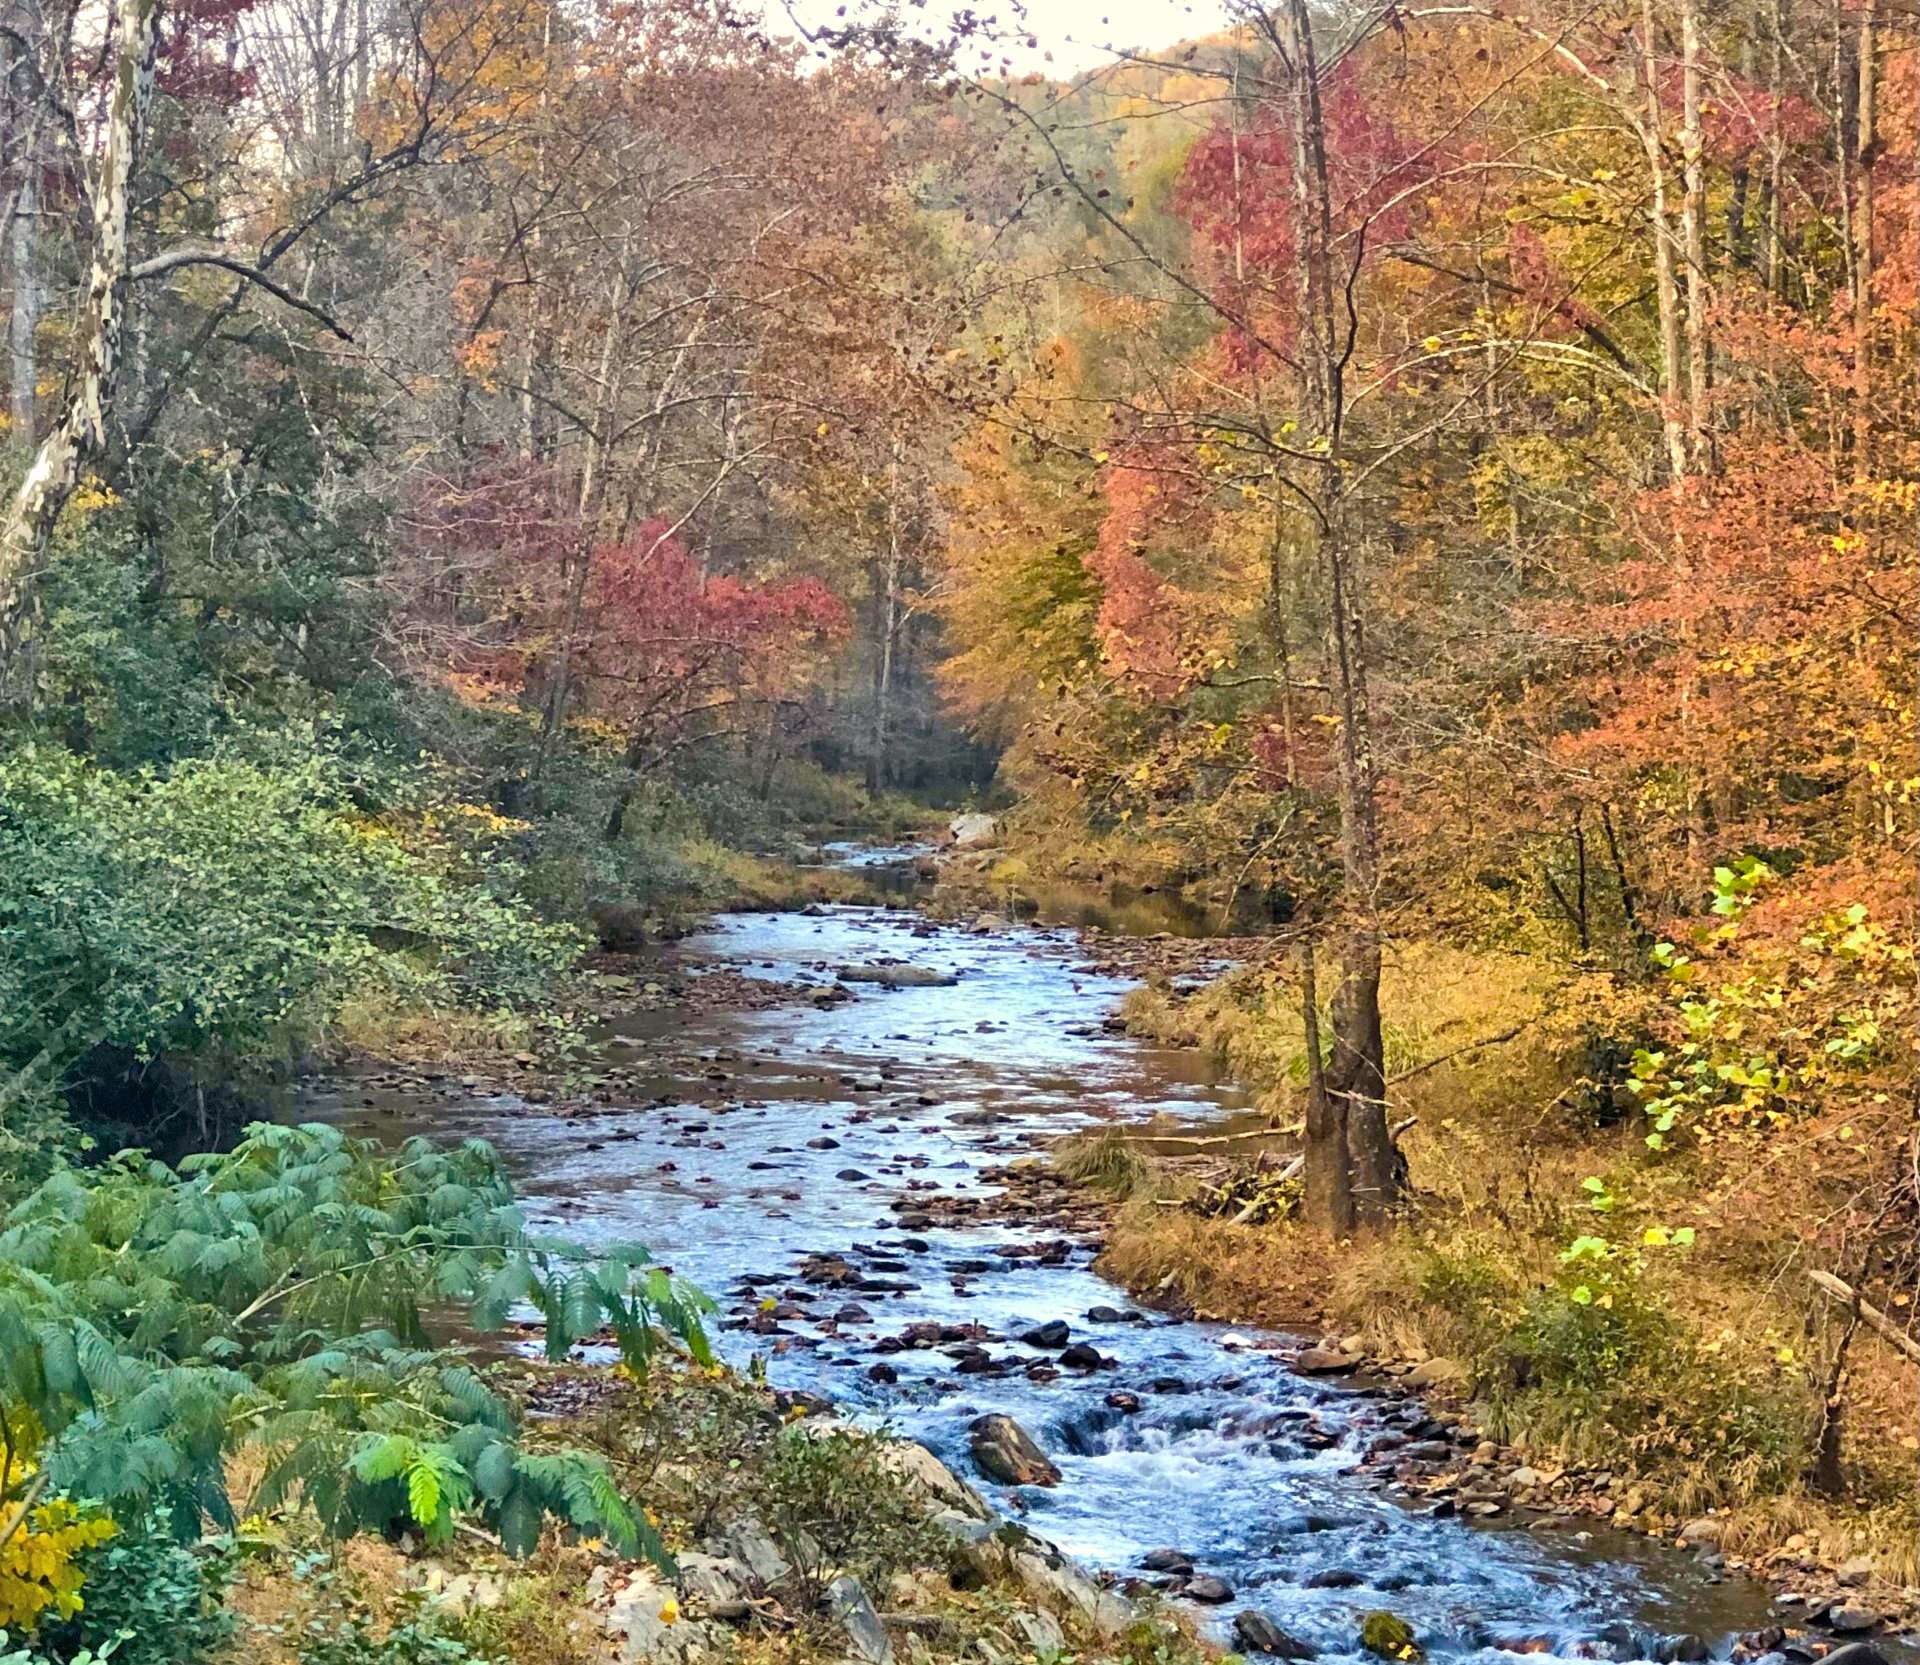 Another shot of Elk Creek in Fall